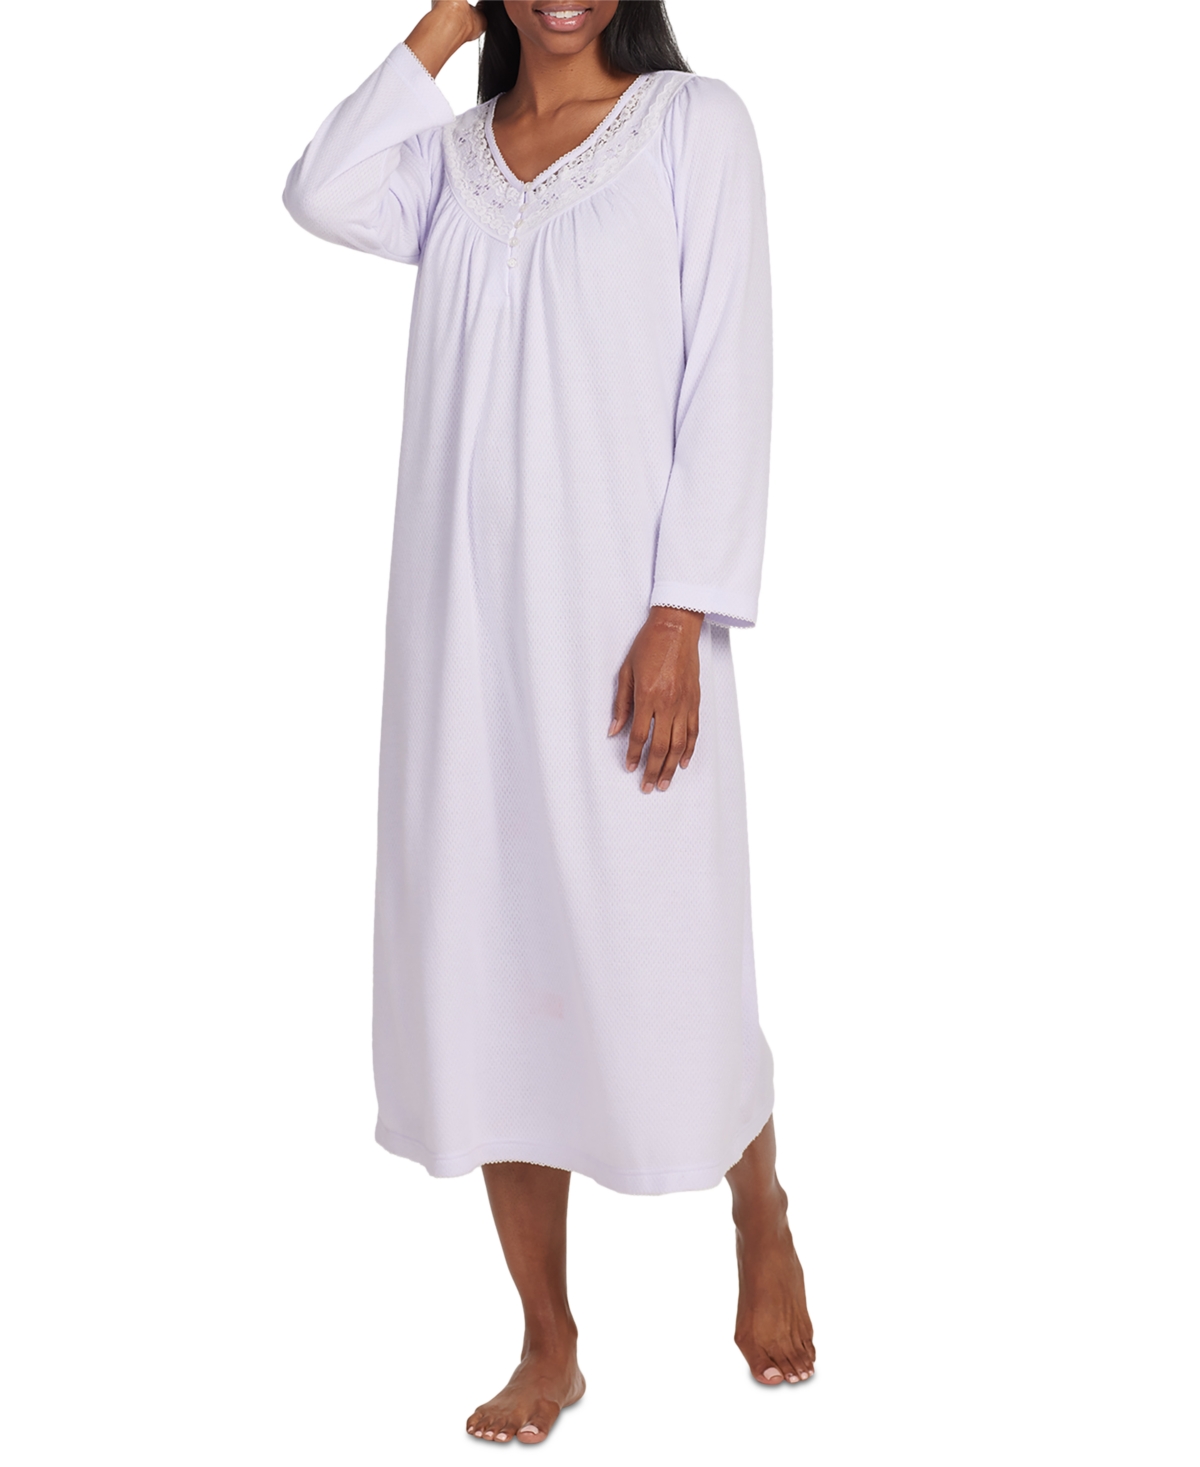 Women's Long-Sleeve Lace-Trim Nightgown - Lavender